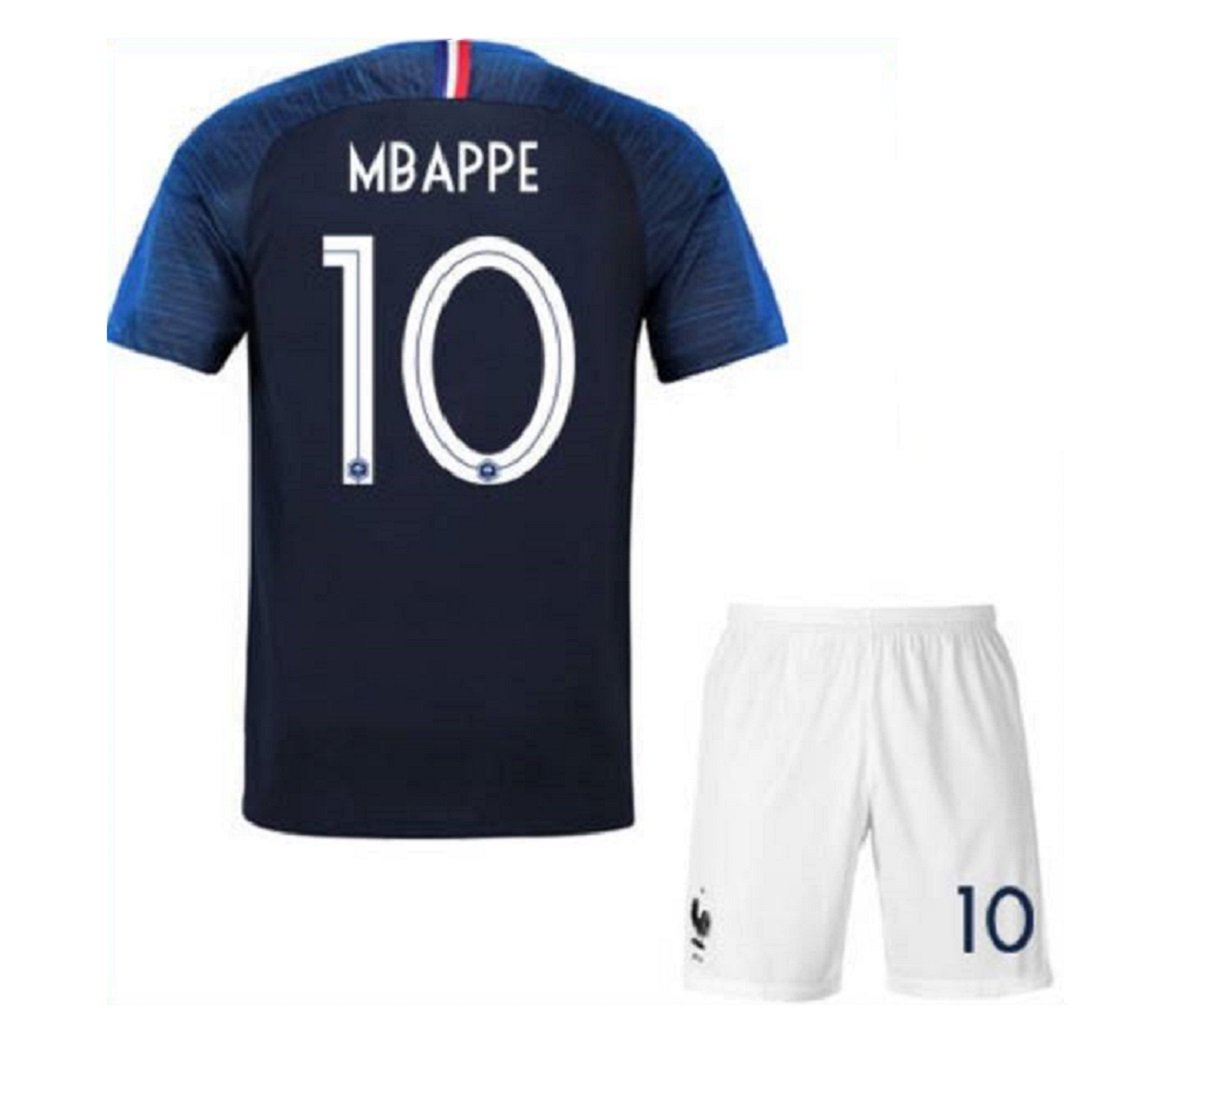 mbappe youth jersey france